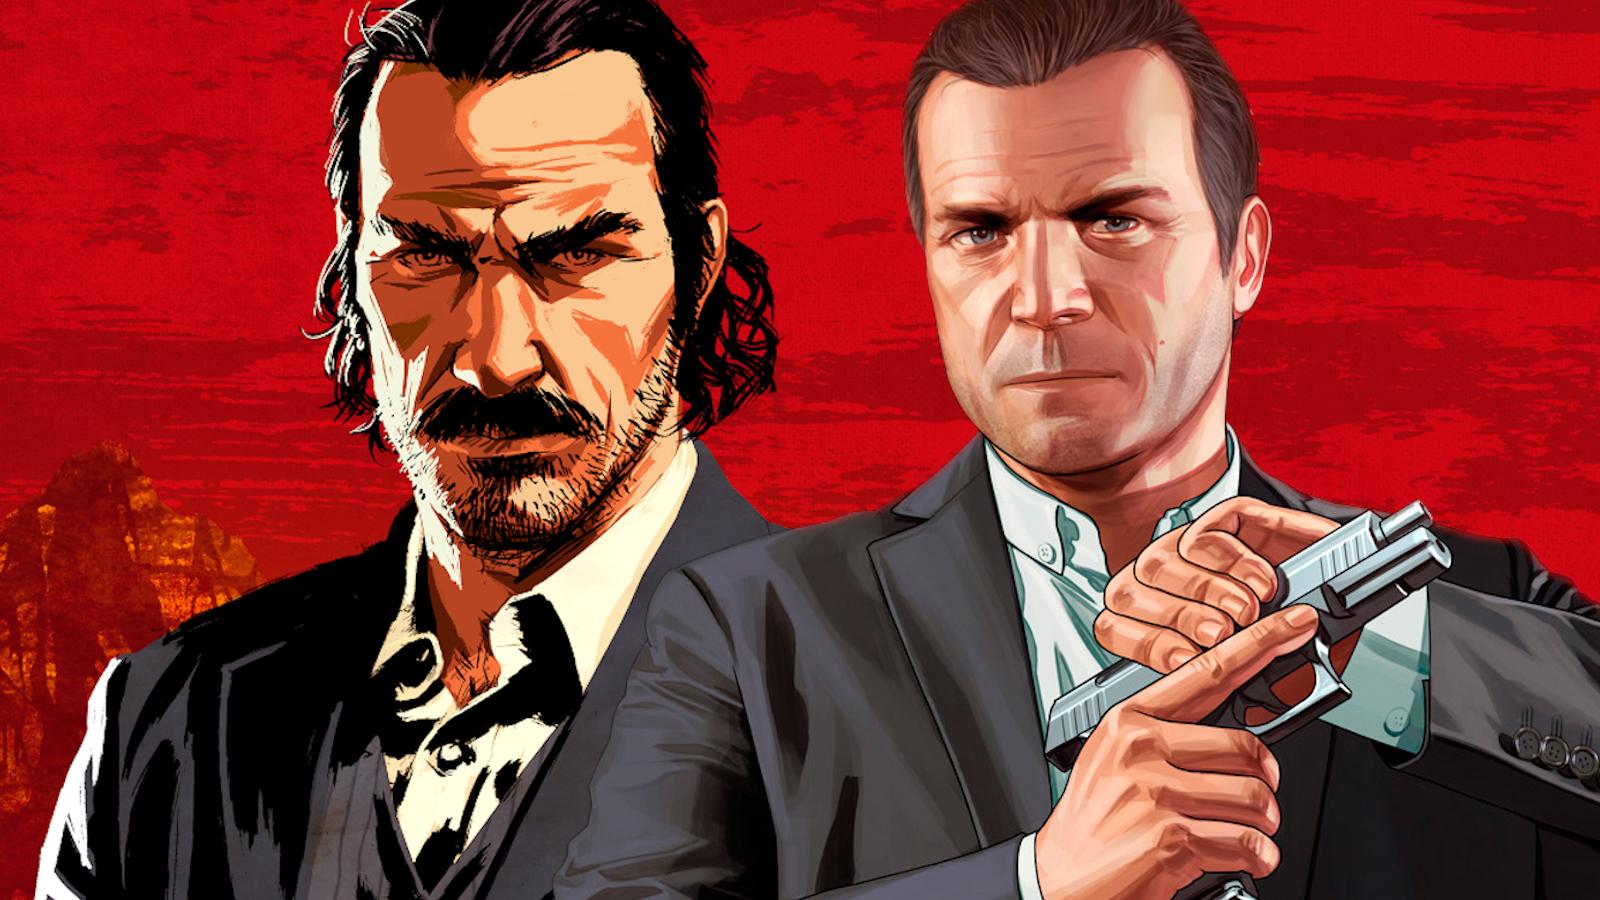 GTA 5's Michael with Dutch on RDR2 red background